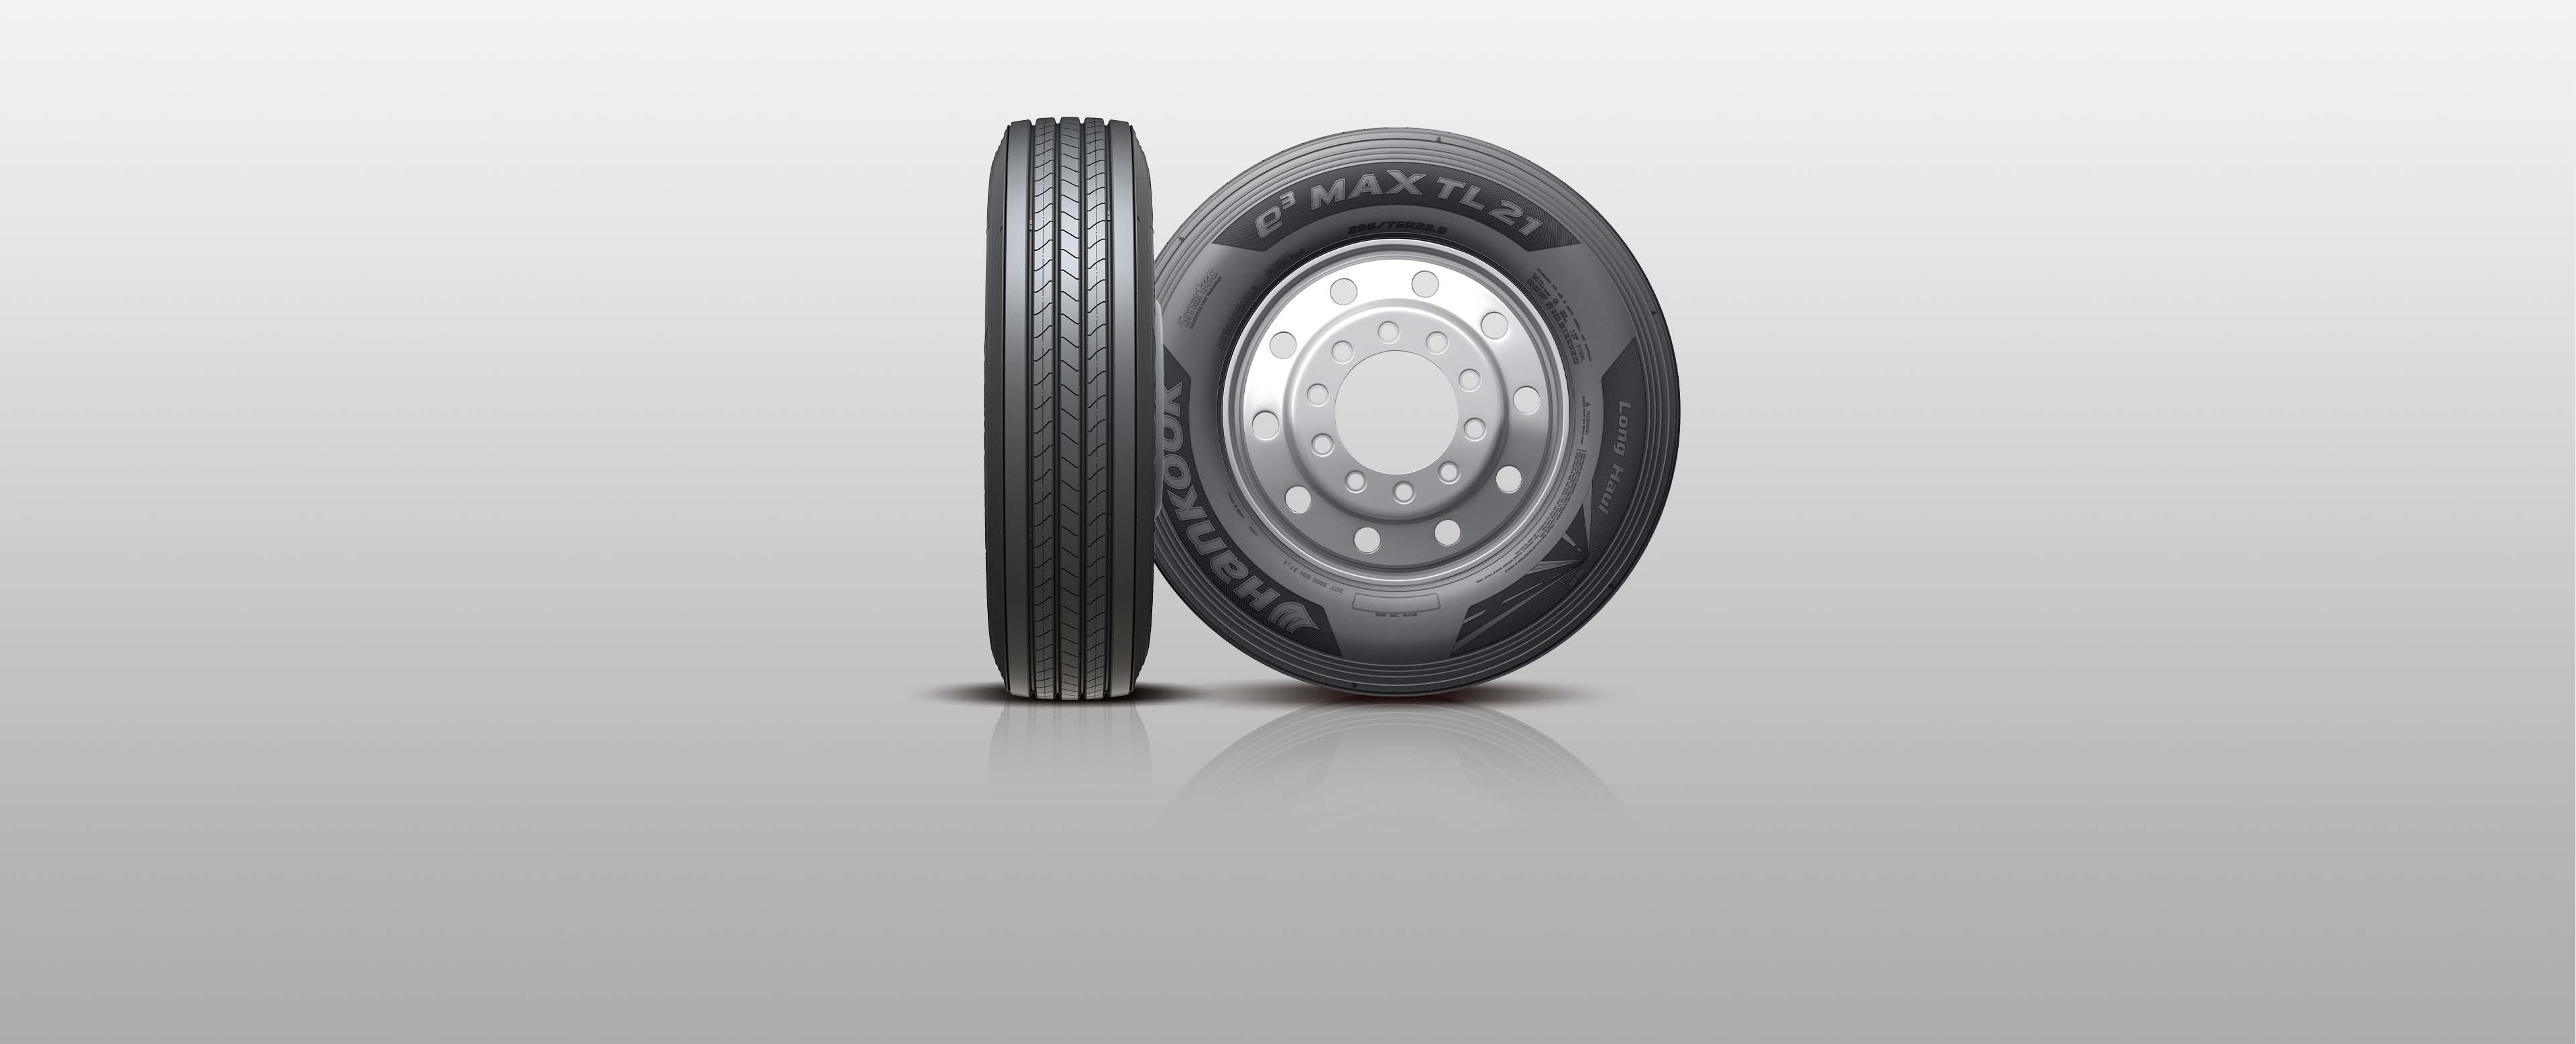 Hankook Tire & Technology-Tires-Smart-Smart Max-TL21-Long Haul Trailer Tire with Long Mileage and Fuel Efficiency